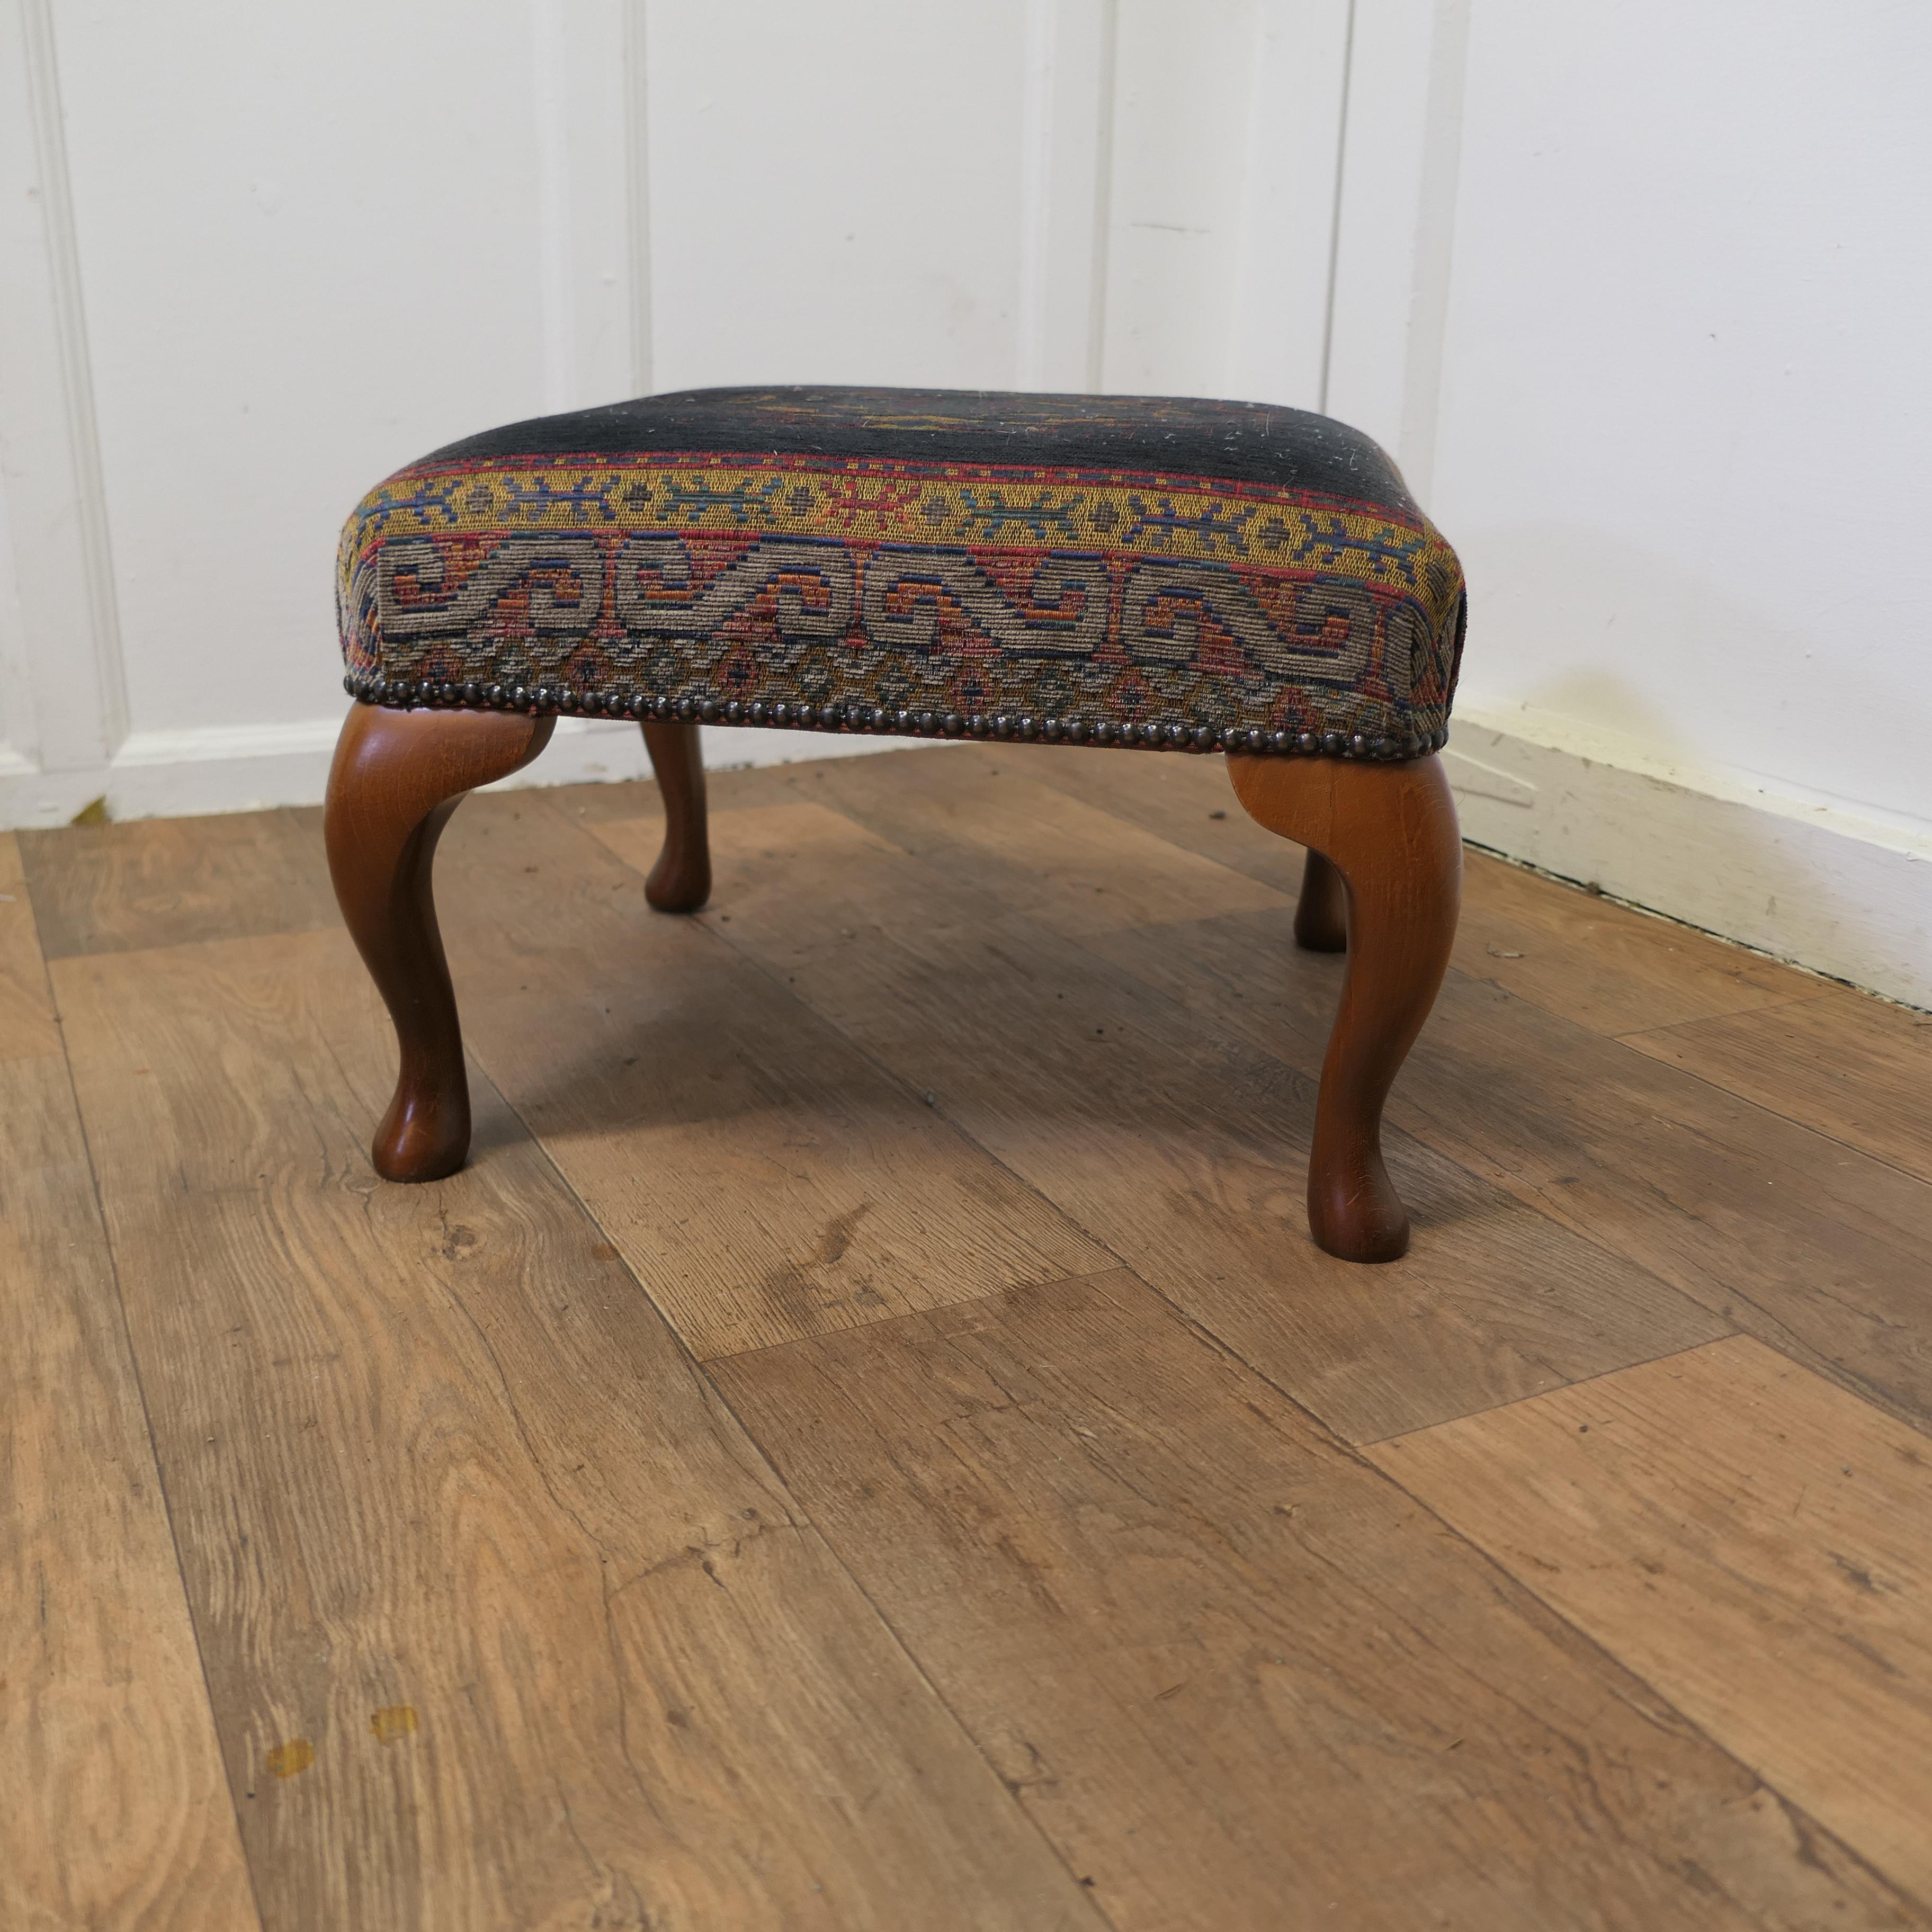 A Petit Point Embroidered Tapestry Upholstered Stool

A Lovely piece, the stool has a geometric designed embroidered wool seat set on a dark blue background, it is set on walnut cabriole legs
The seat has a few signs of wear but it is in generally